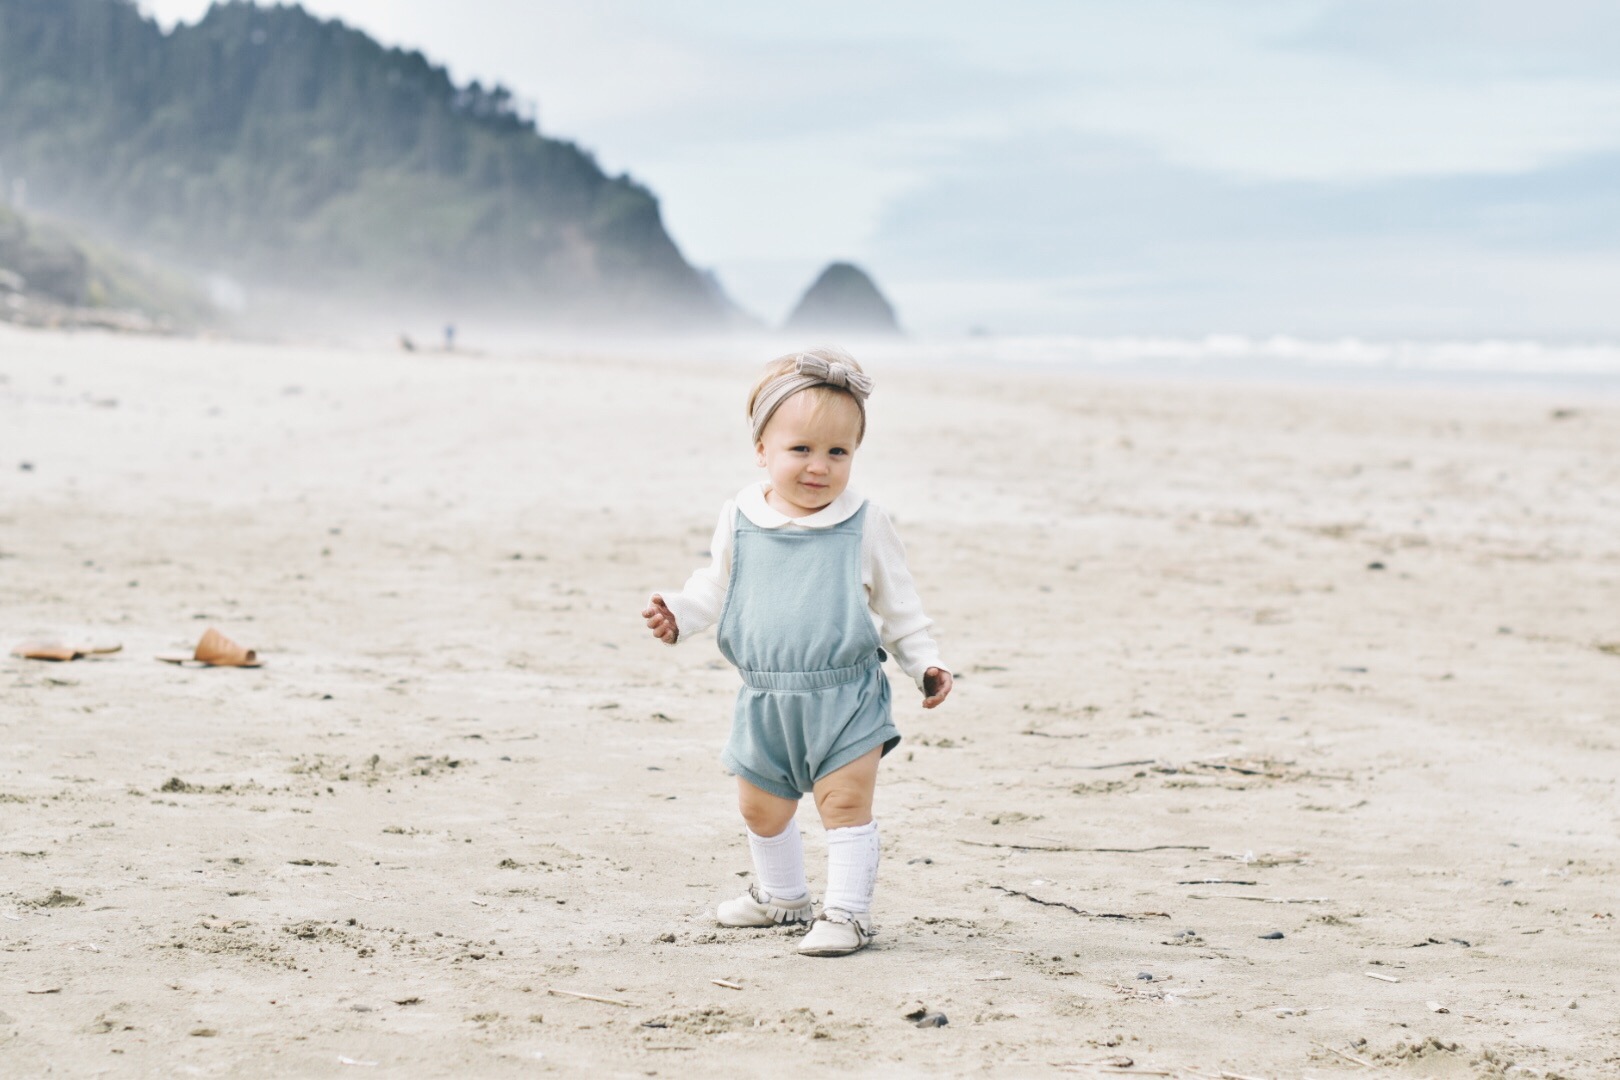 The Best Things To Do in Cannon Beach Oregon feature by top US life and style blog, Outfits & Outings